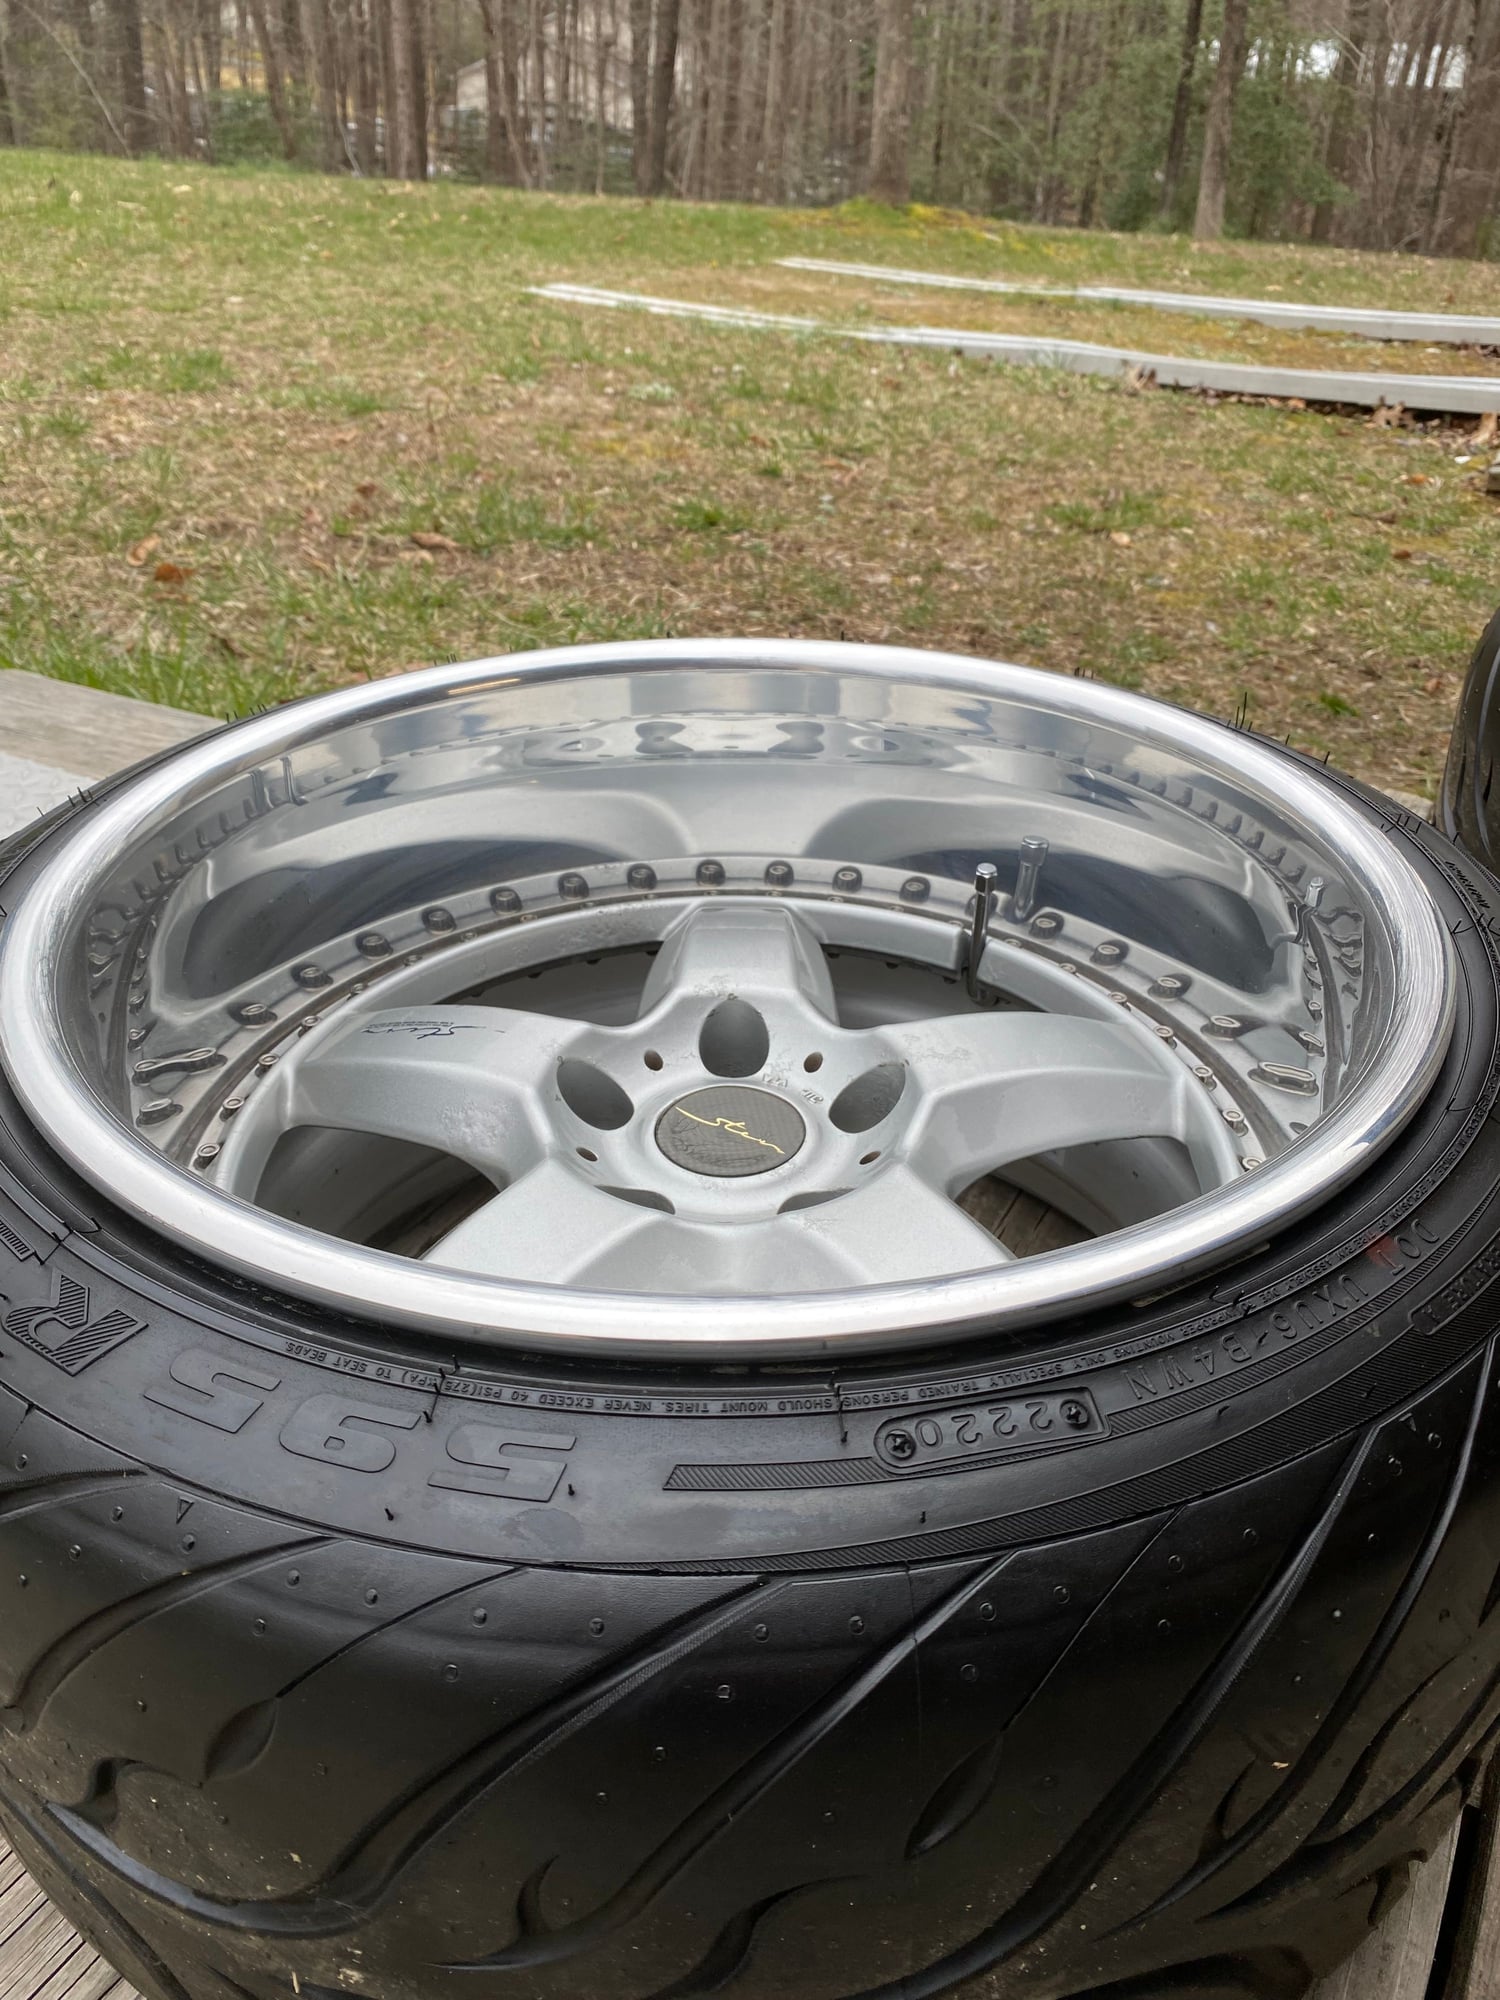 Wheels and Tires/Axles - JDM Stern Beast 17x9.75 -22 17x10.25-23 New Barrels New Tires wide body RX-7 FC FD - Used - 1986 to 1995 Mazda RX-7 - Prince Frederick, MD 20678, United States